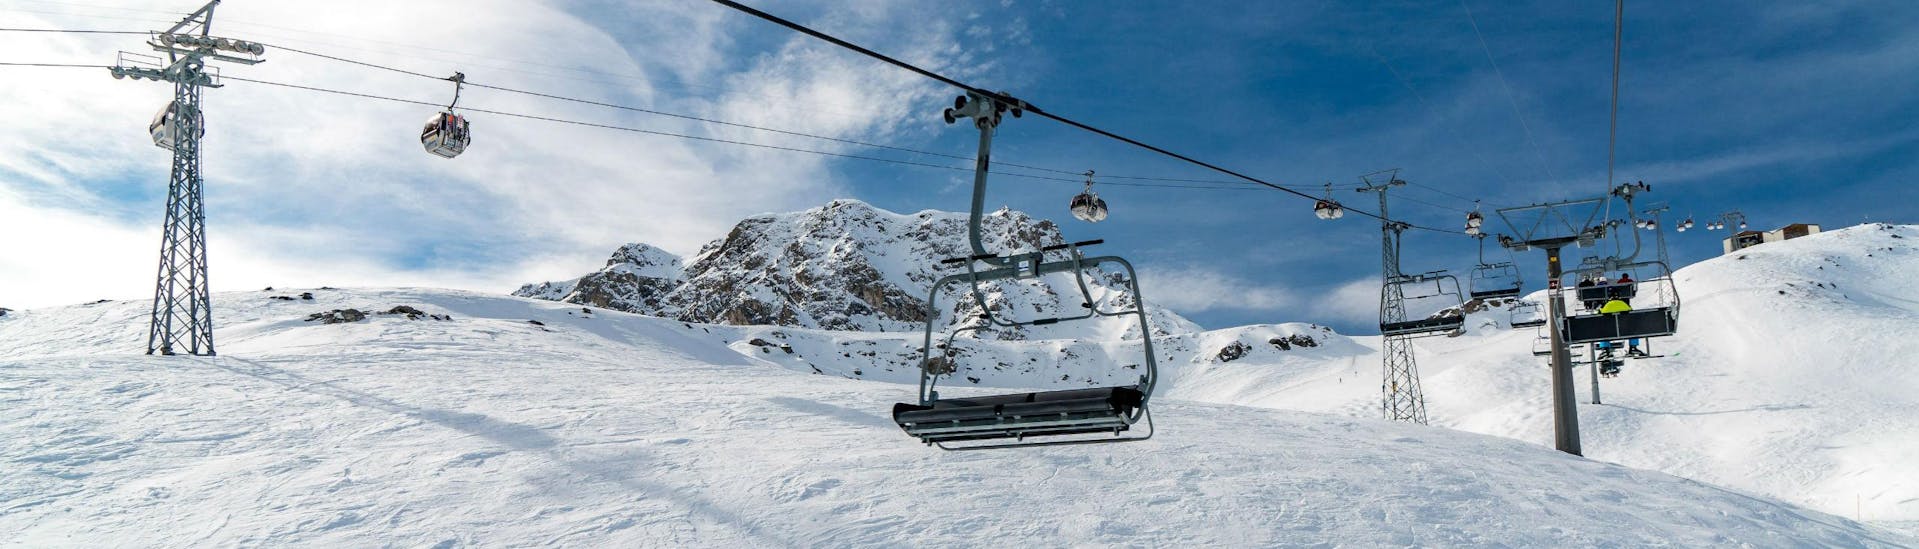 An image of a chair lift and a gondola in the Swiss ski resort of Arosa in the Grisons, where local ski schools offer ski lessons for all those who want to learn to ski.